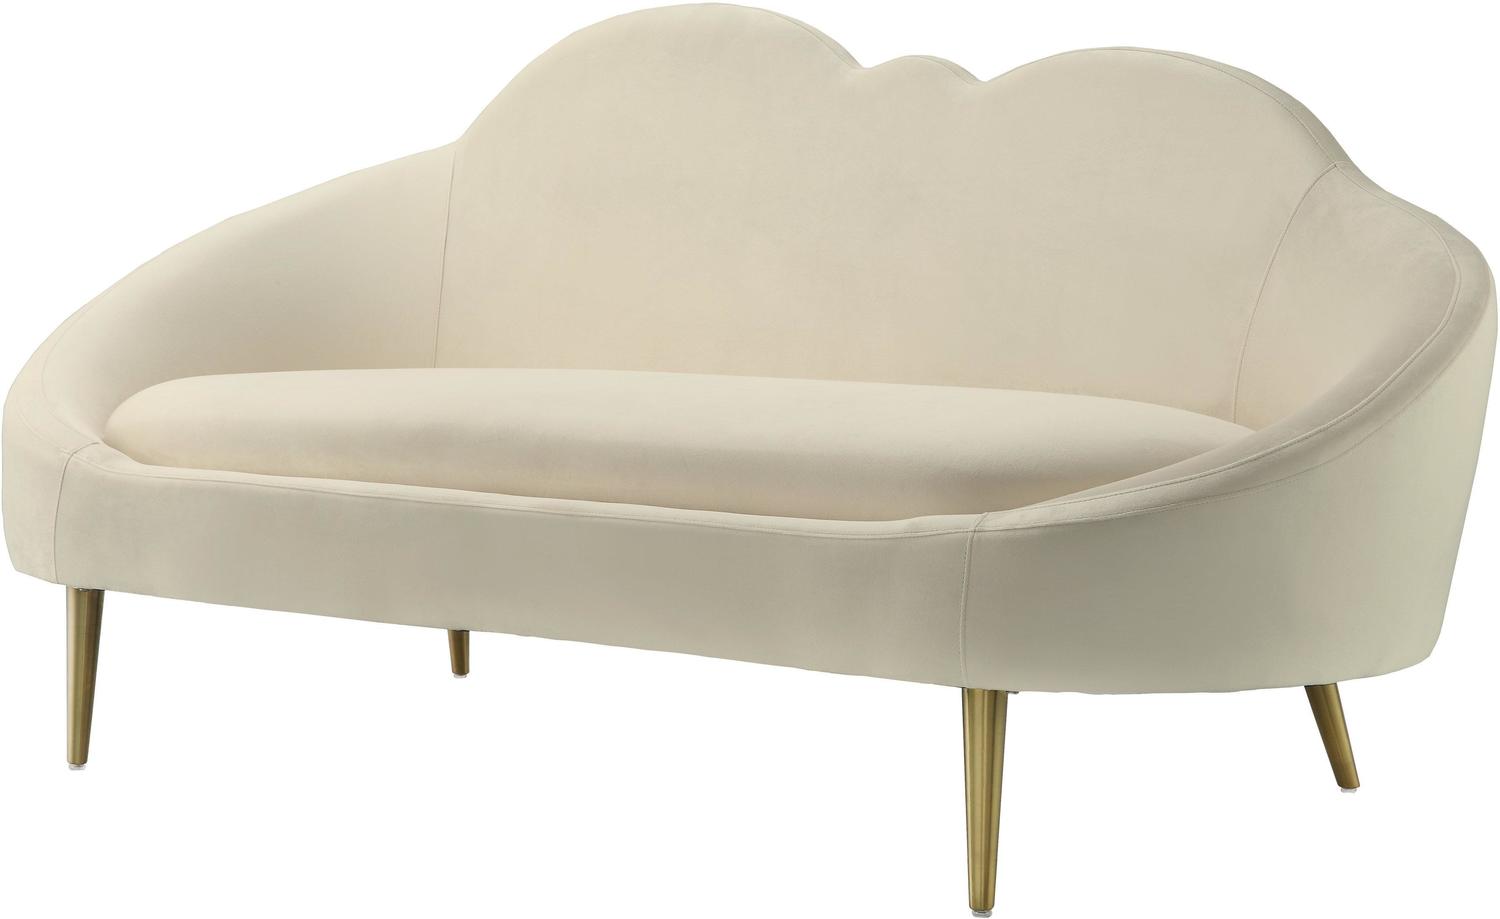 high end sectional couches Tov Furniture Settees Cream